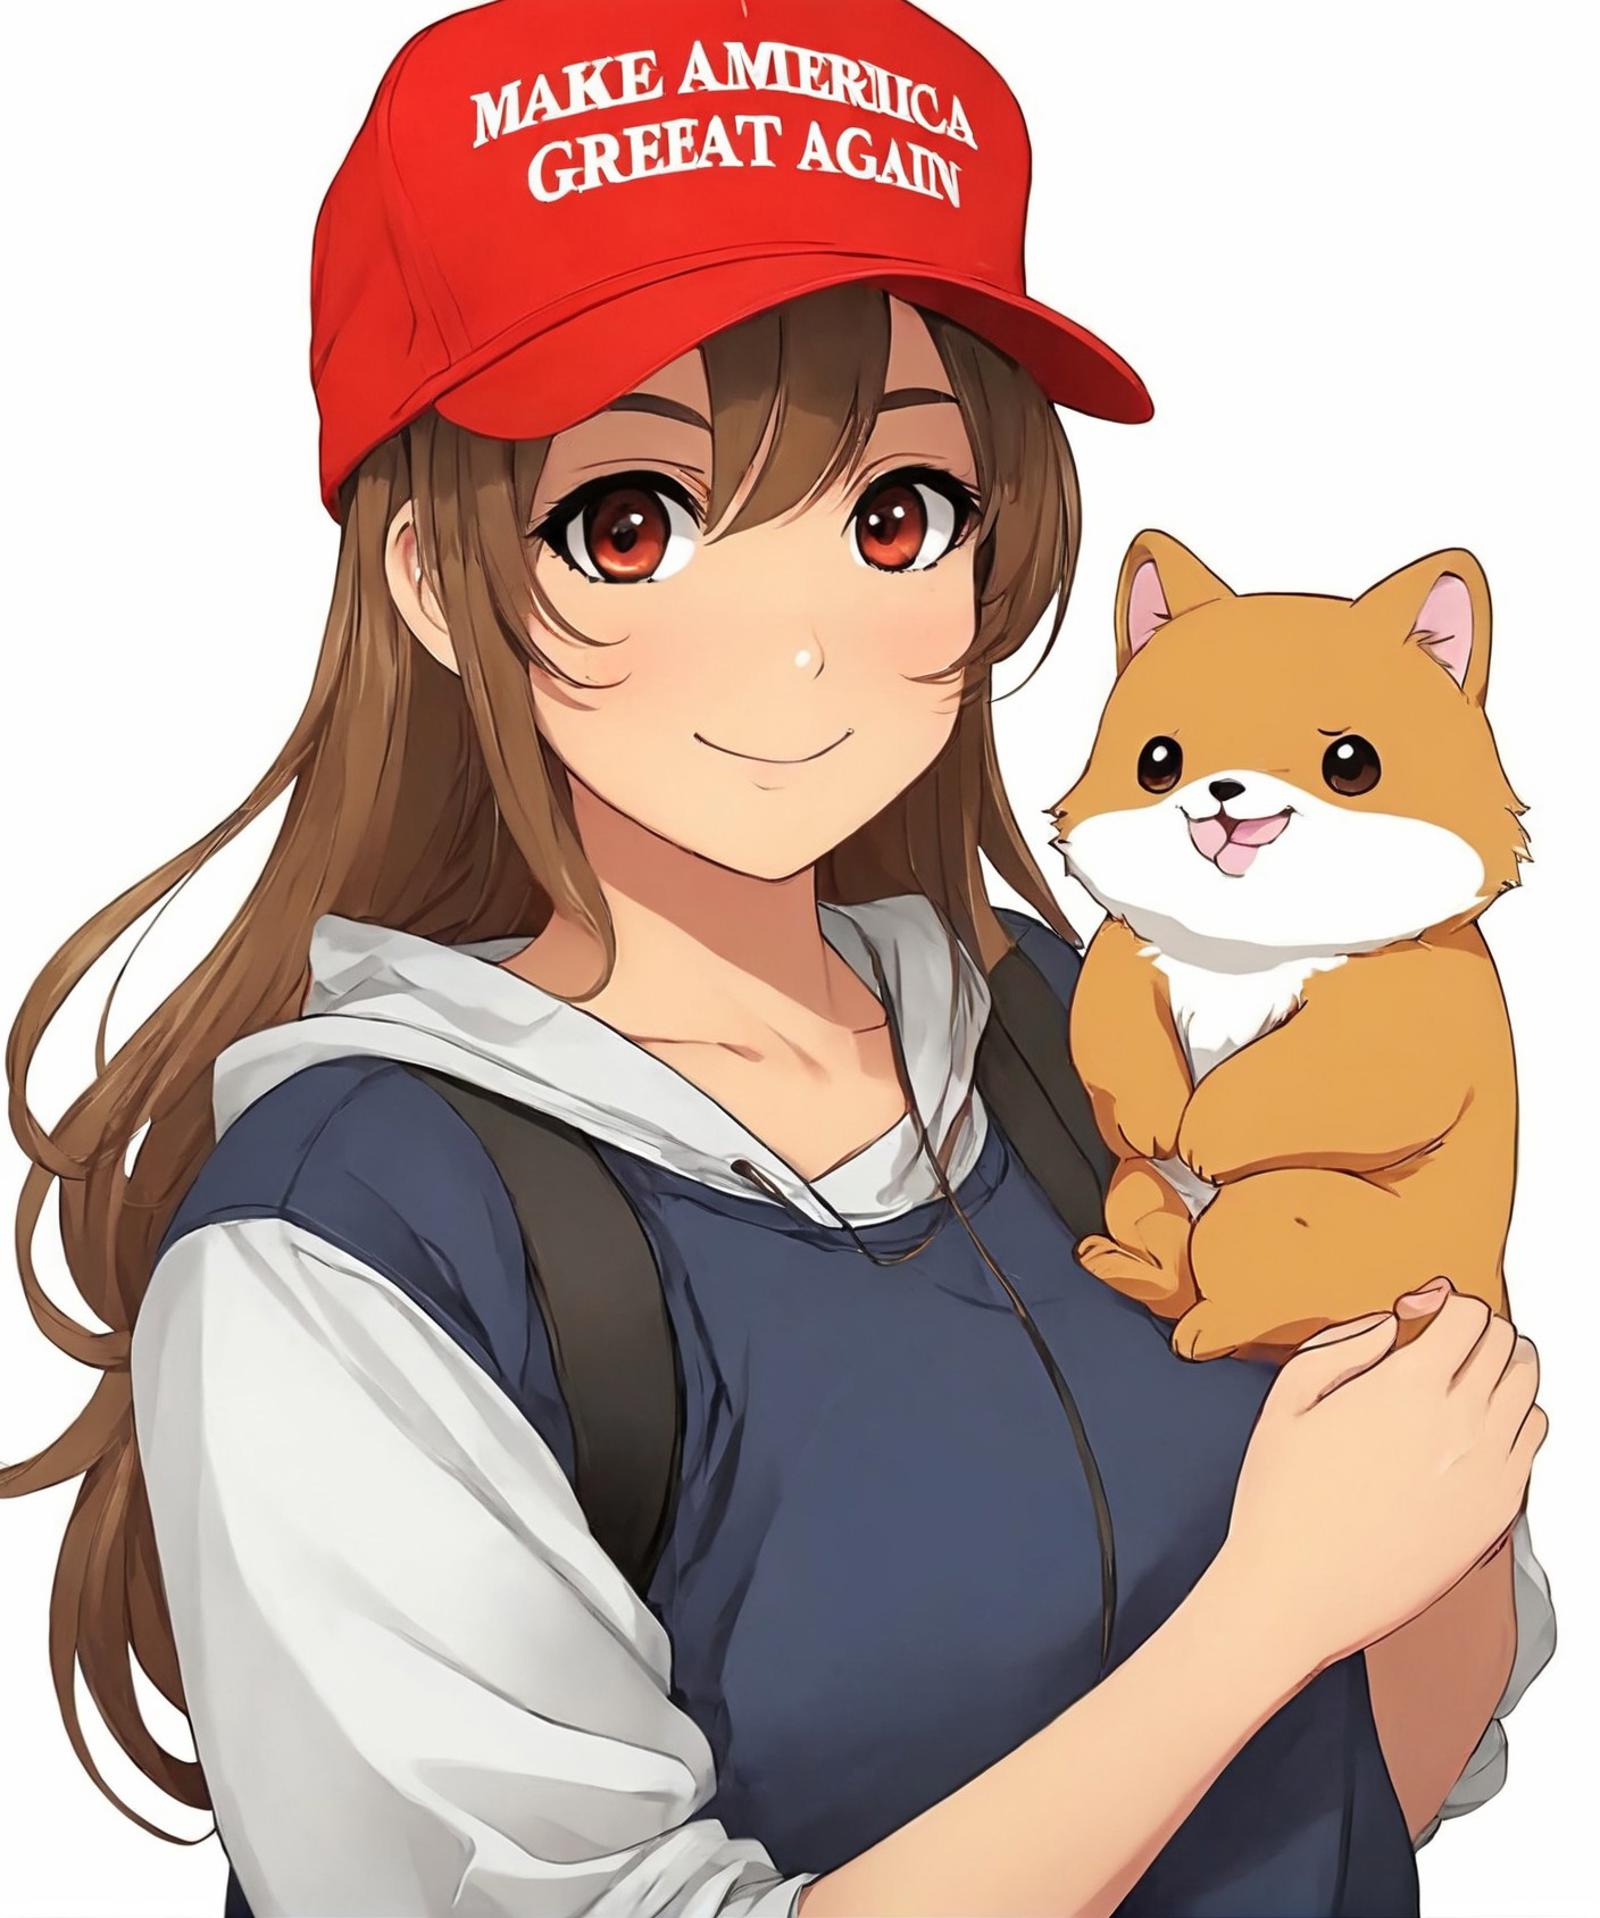 MAGA Hat image by alexds9